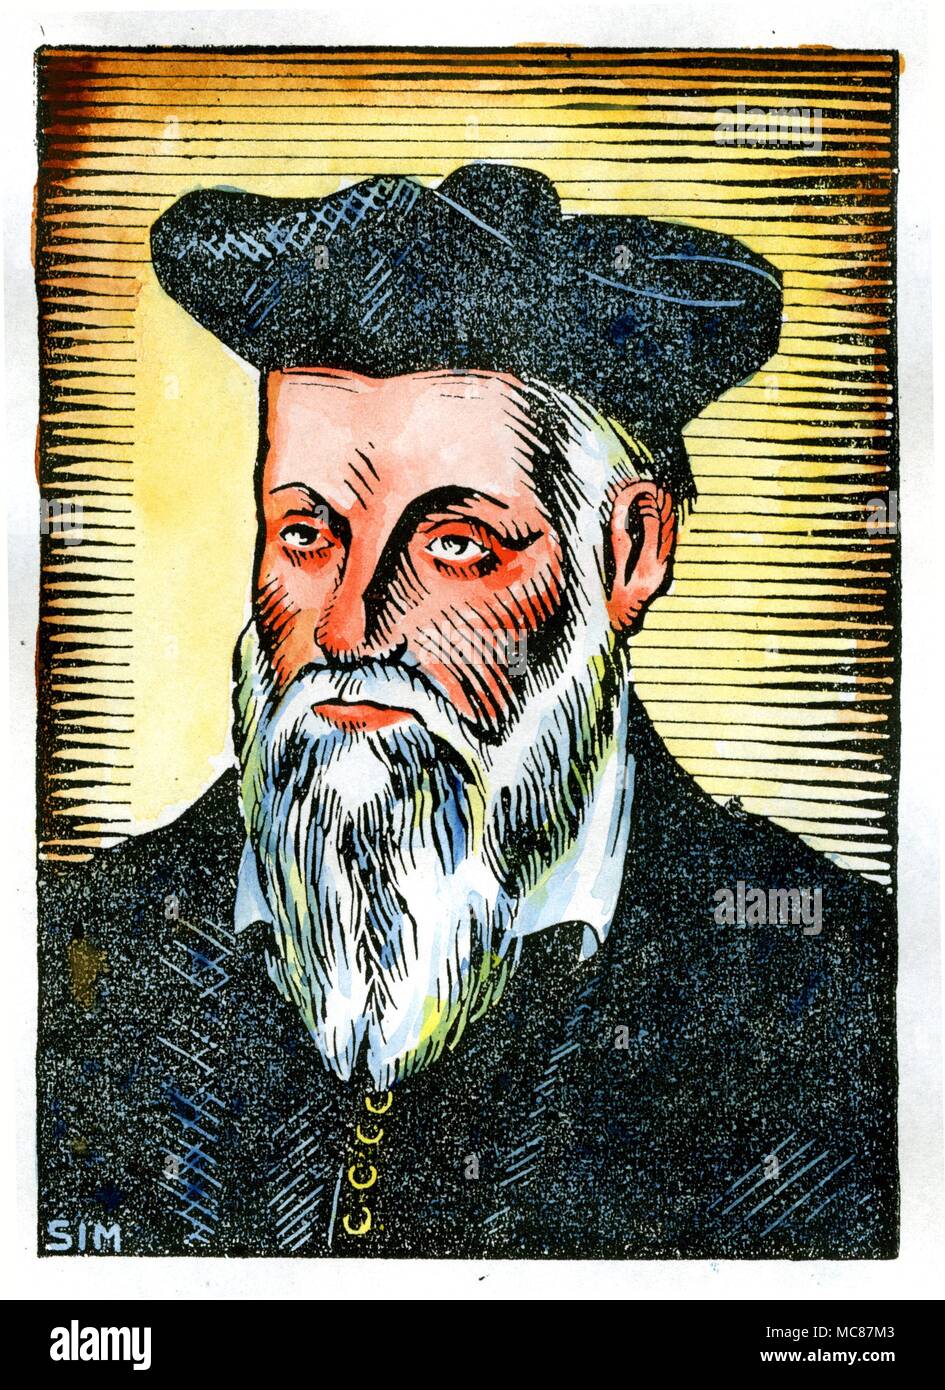 Vignette portrait of Nostradamus from the titlepage of the 1940 edition of 'Les Vraies Centuries et Propheties de Michel Nostradamus' by Charles Reynaud-Plense. Stock Photo